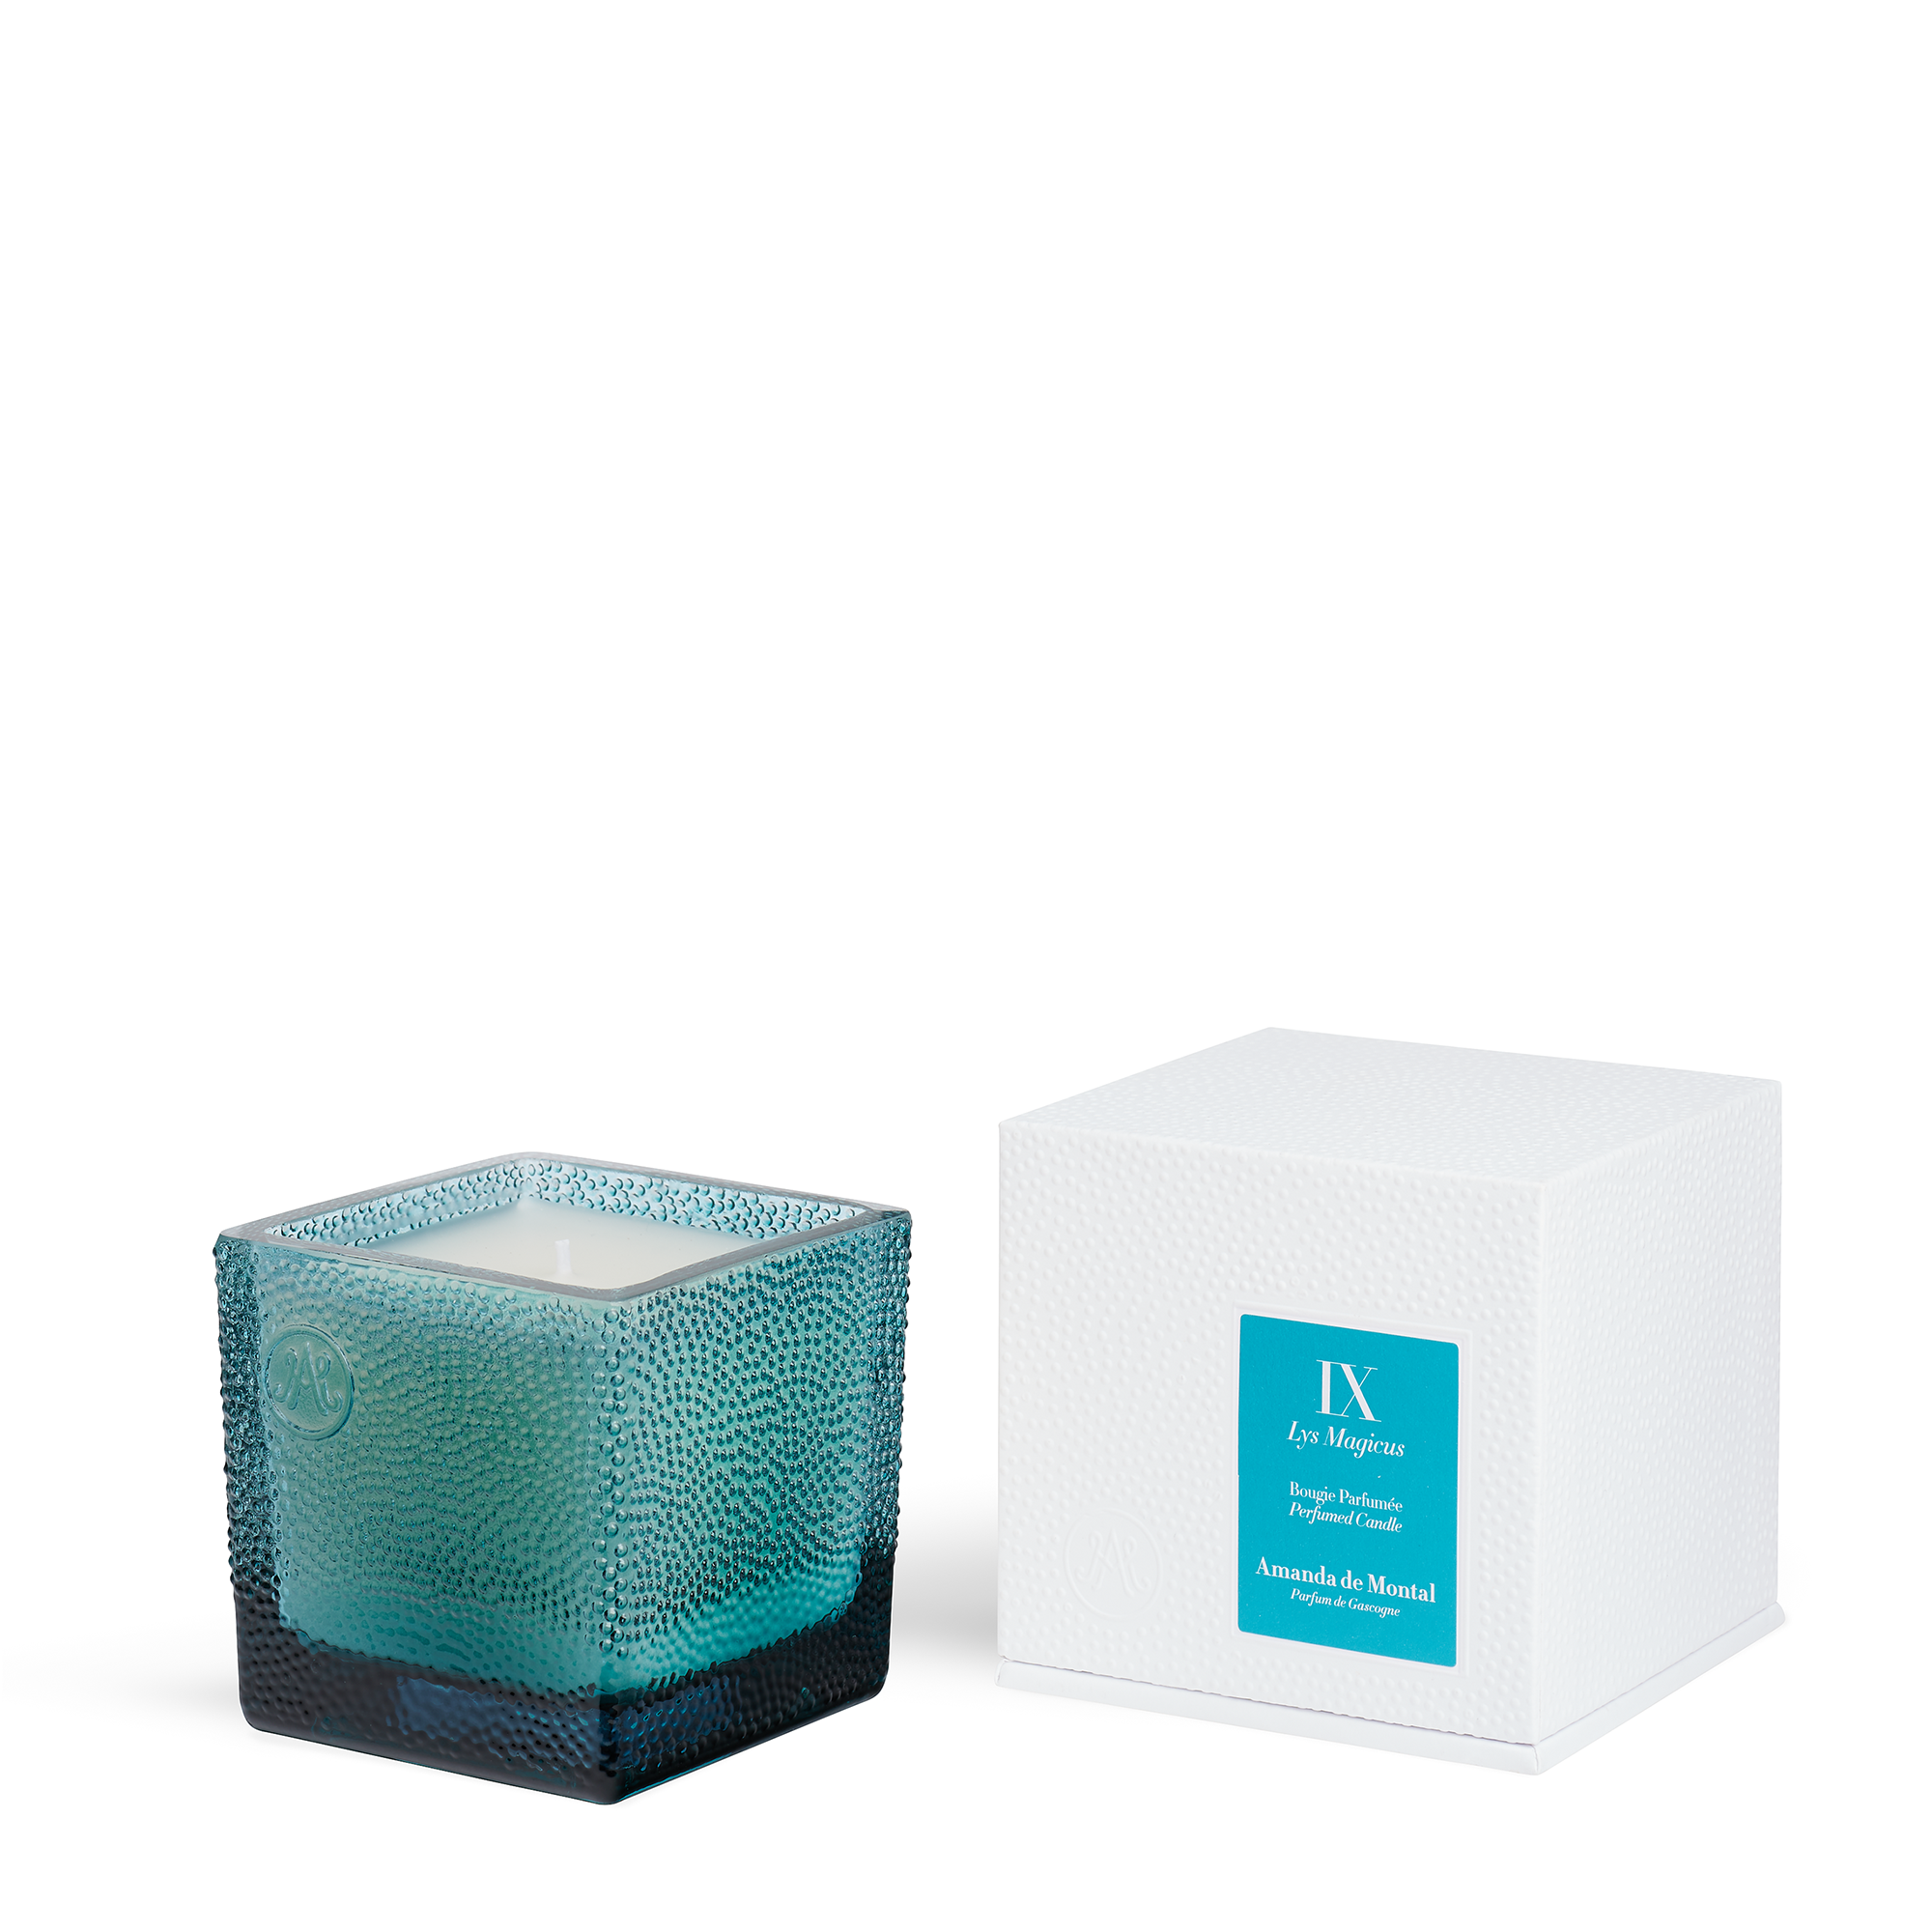 The essence of Lily of the Valley with a touch of honey and freshly cut grass. The artisanal blue glass candle vessel contains thousands of bubbles, revealing a twinkling flame.